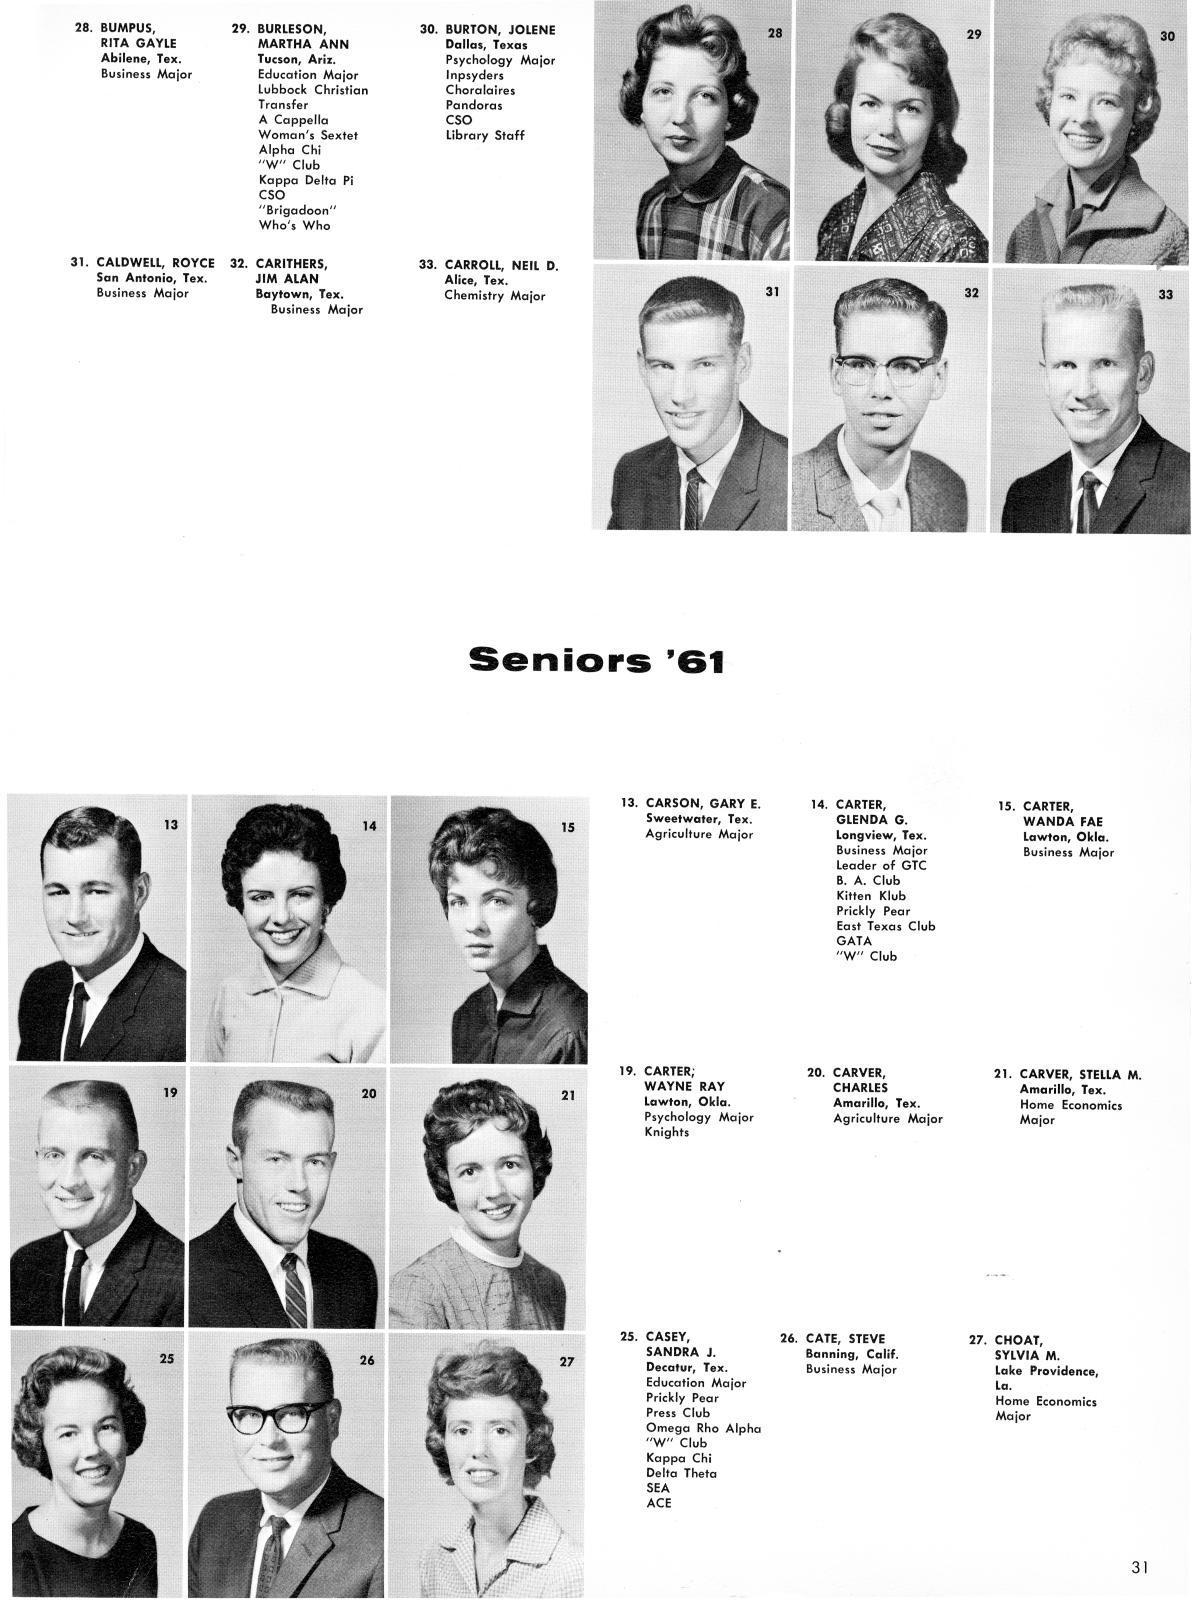 Prickly Pear, Yearbook of Abilene Christian College, 1961
                                                
                                                    31
                                                